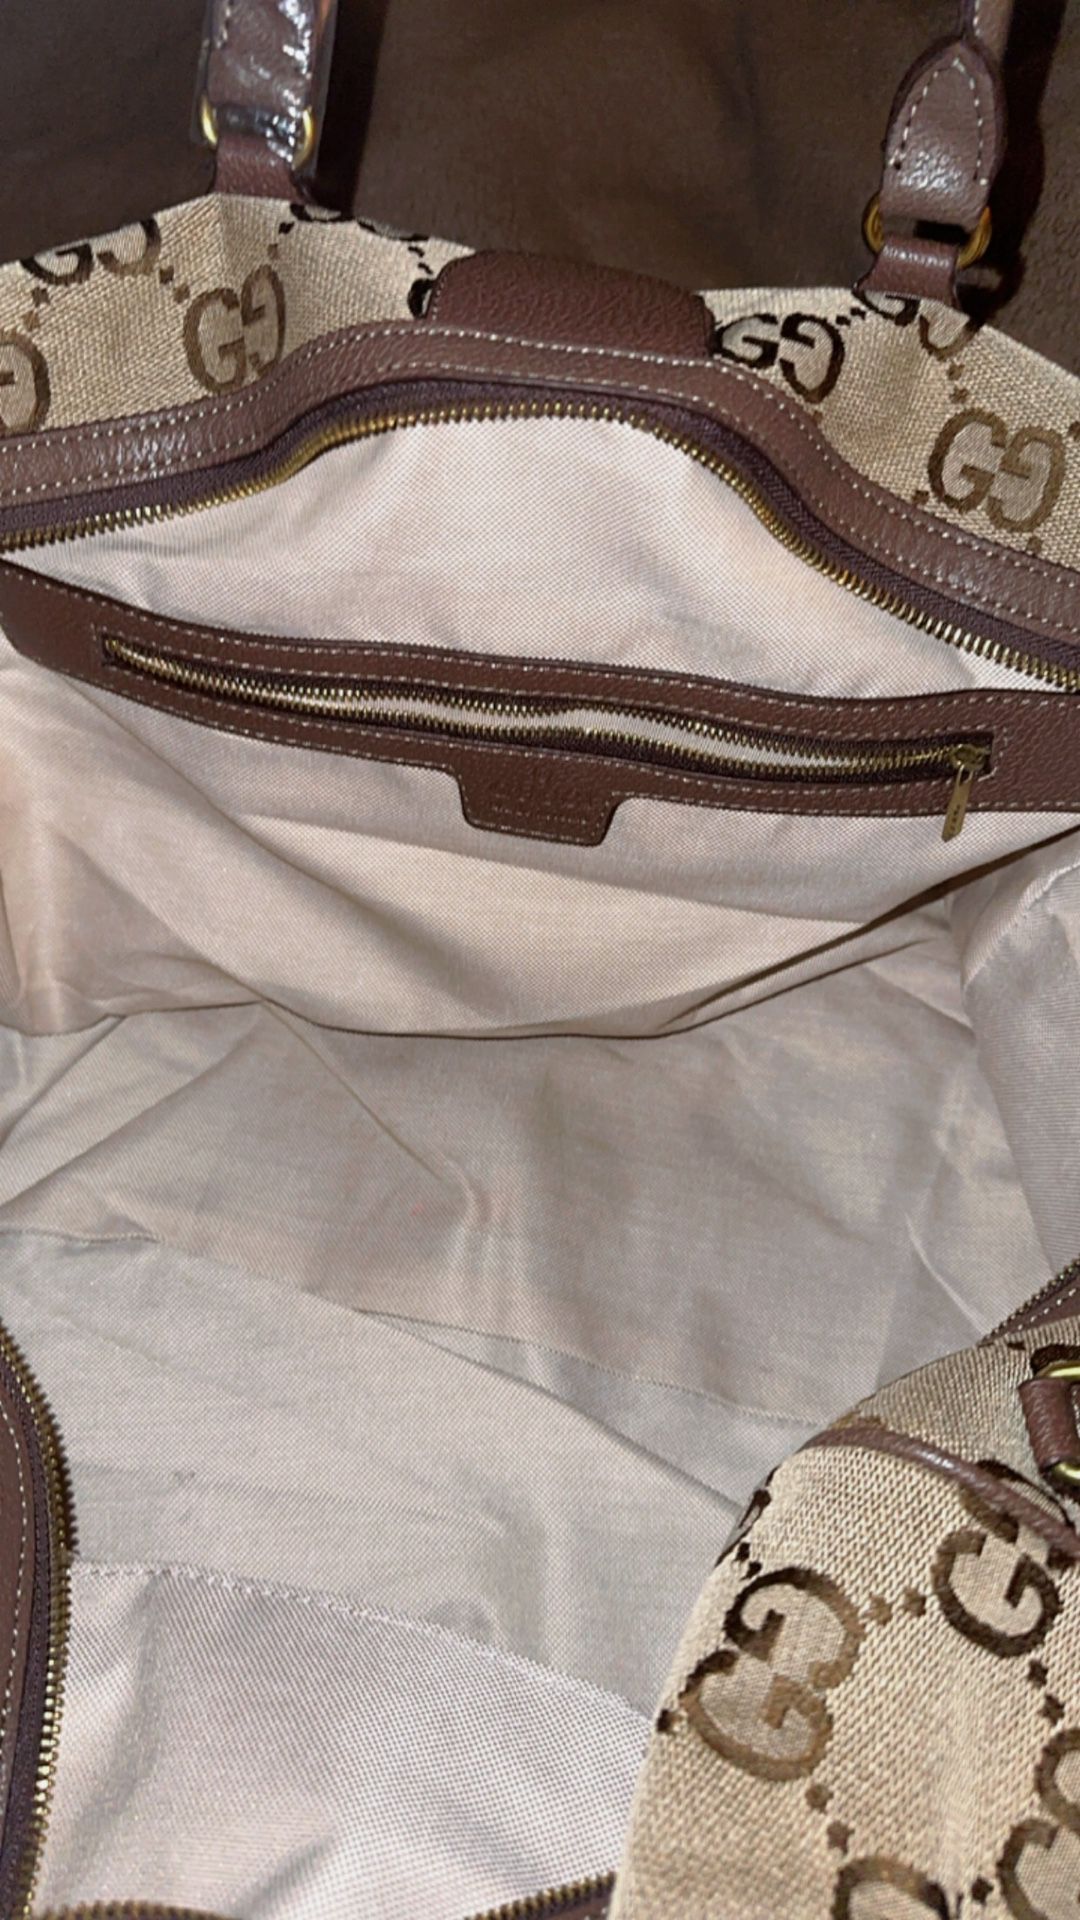 GG dupe small duffle bag 